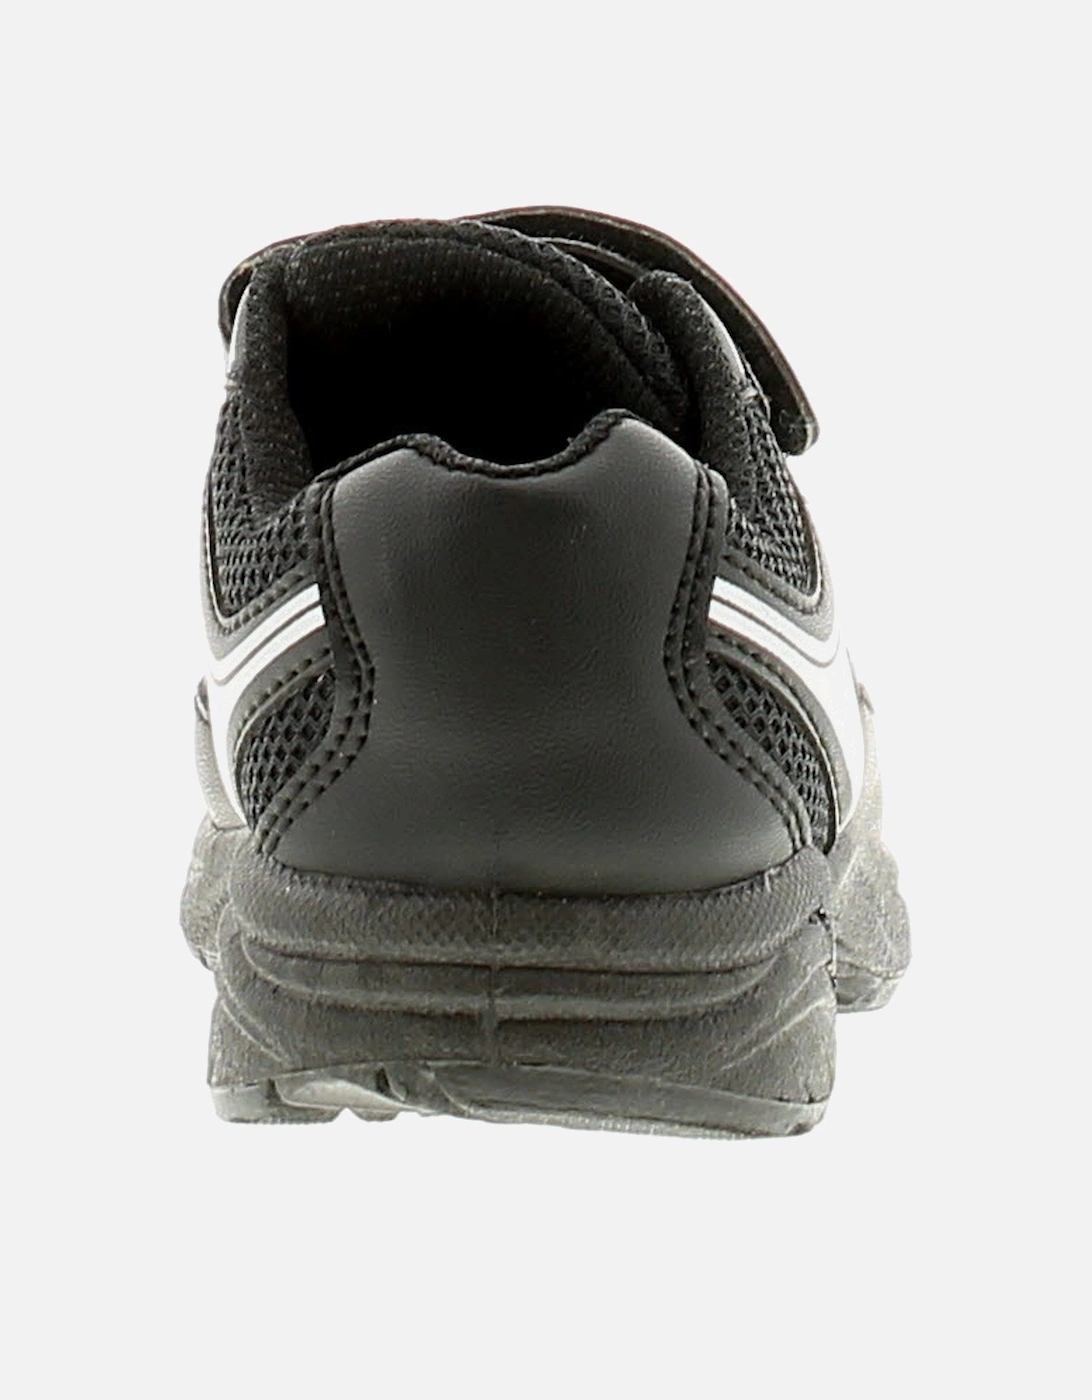 Younger Boys Trainers Digger Touch Fastening black silver UK Size